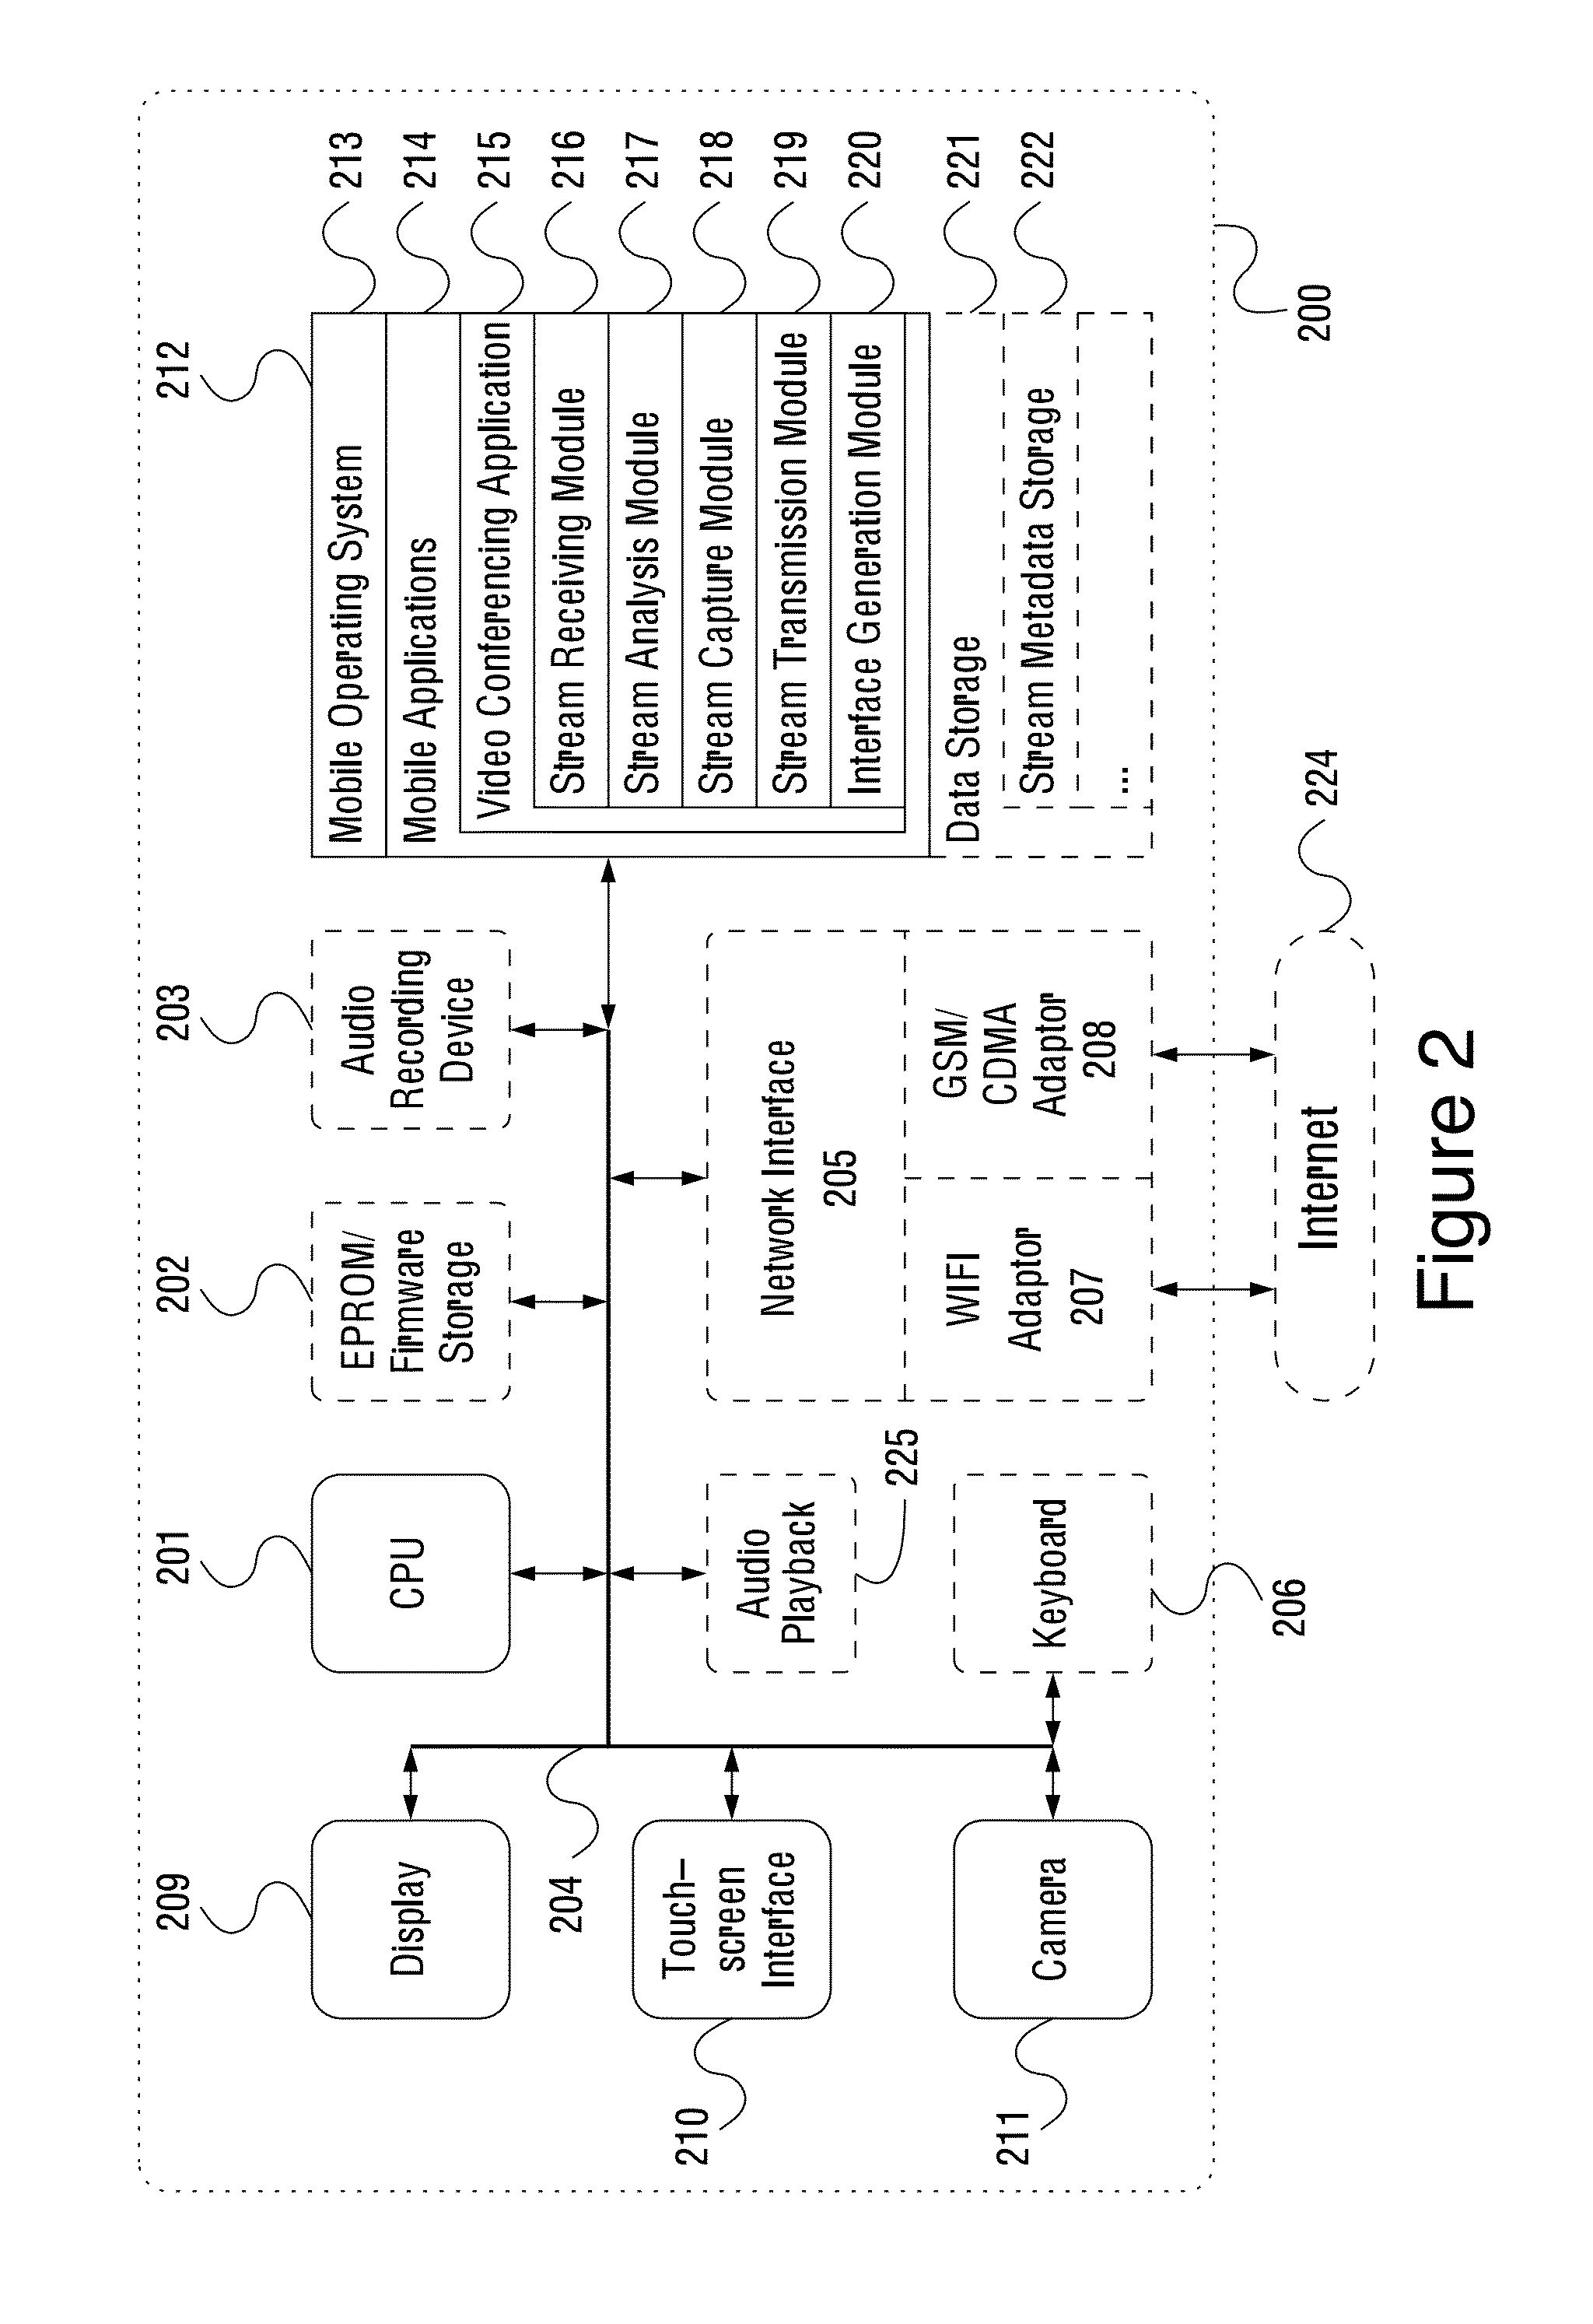 Systems and methods for real-time efficient navigation of video streams